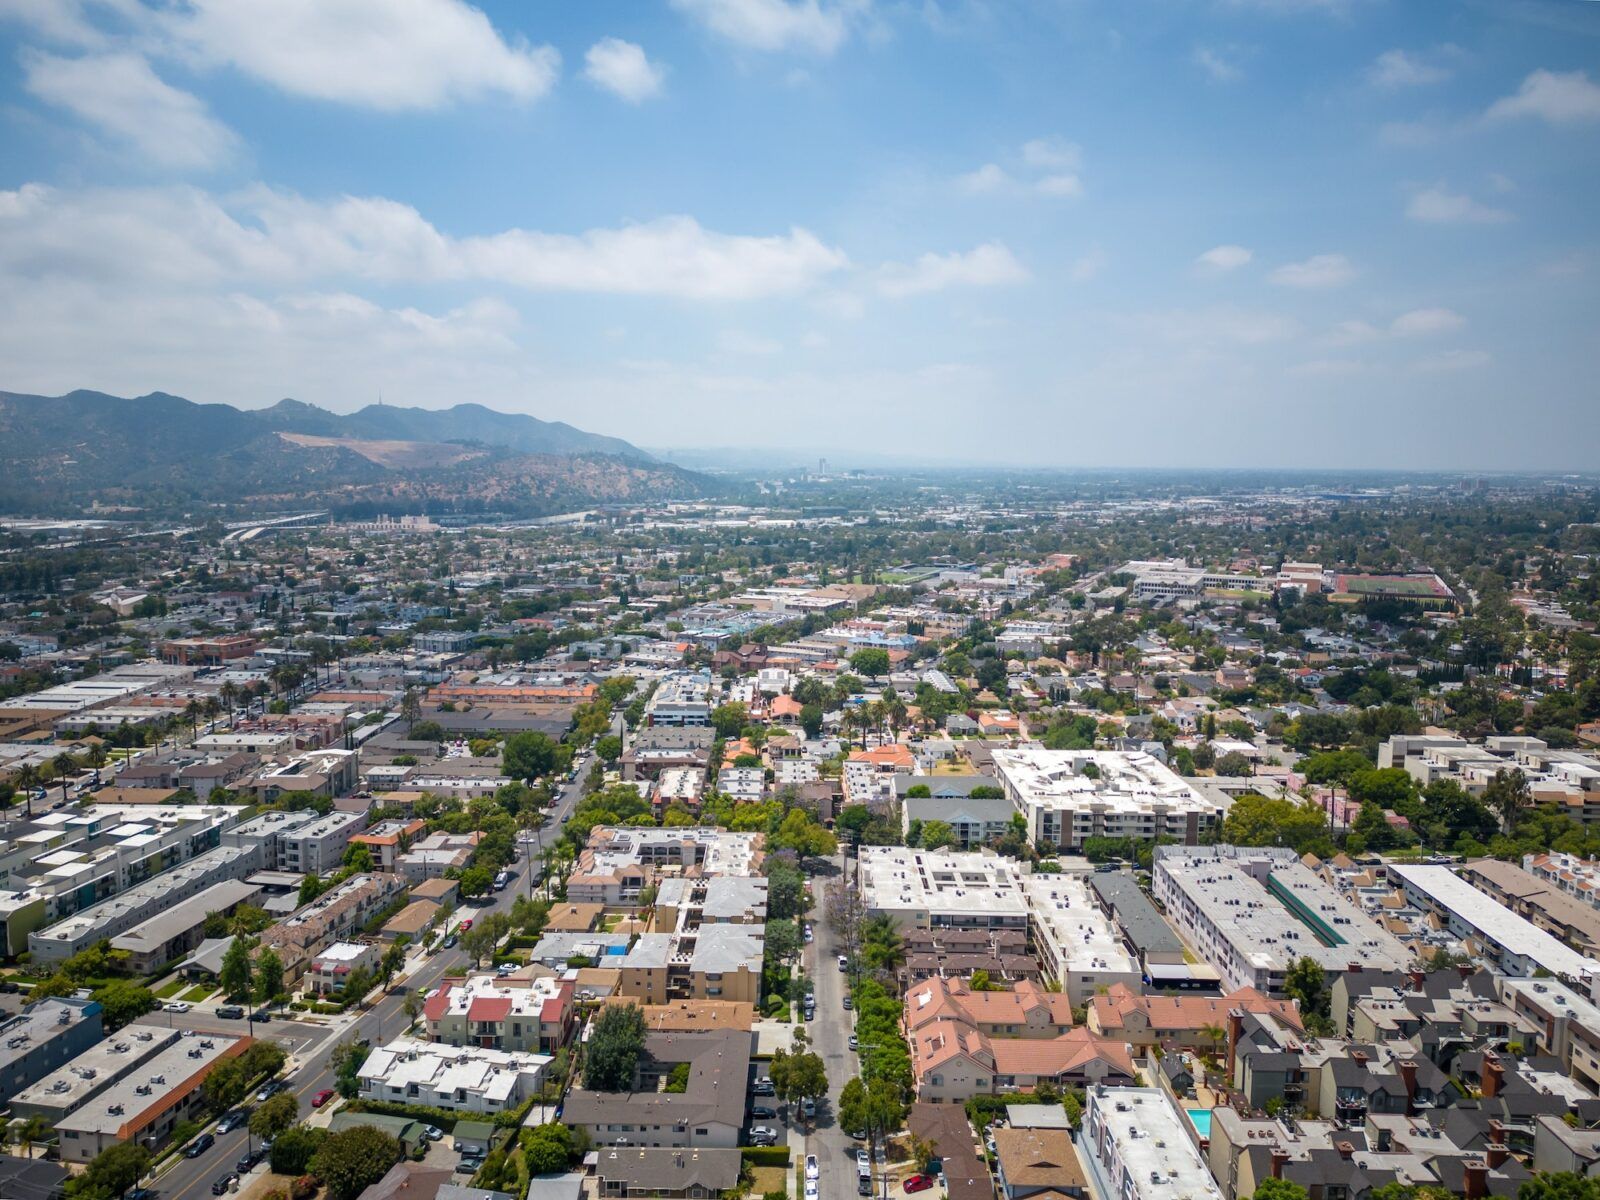 Aerial view of the architecture in Glendale, California on a sunny day